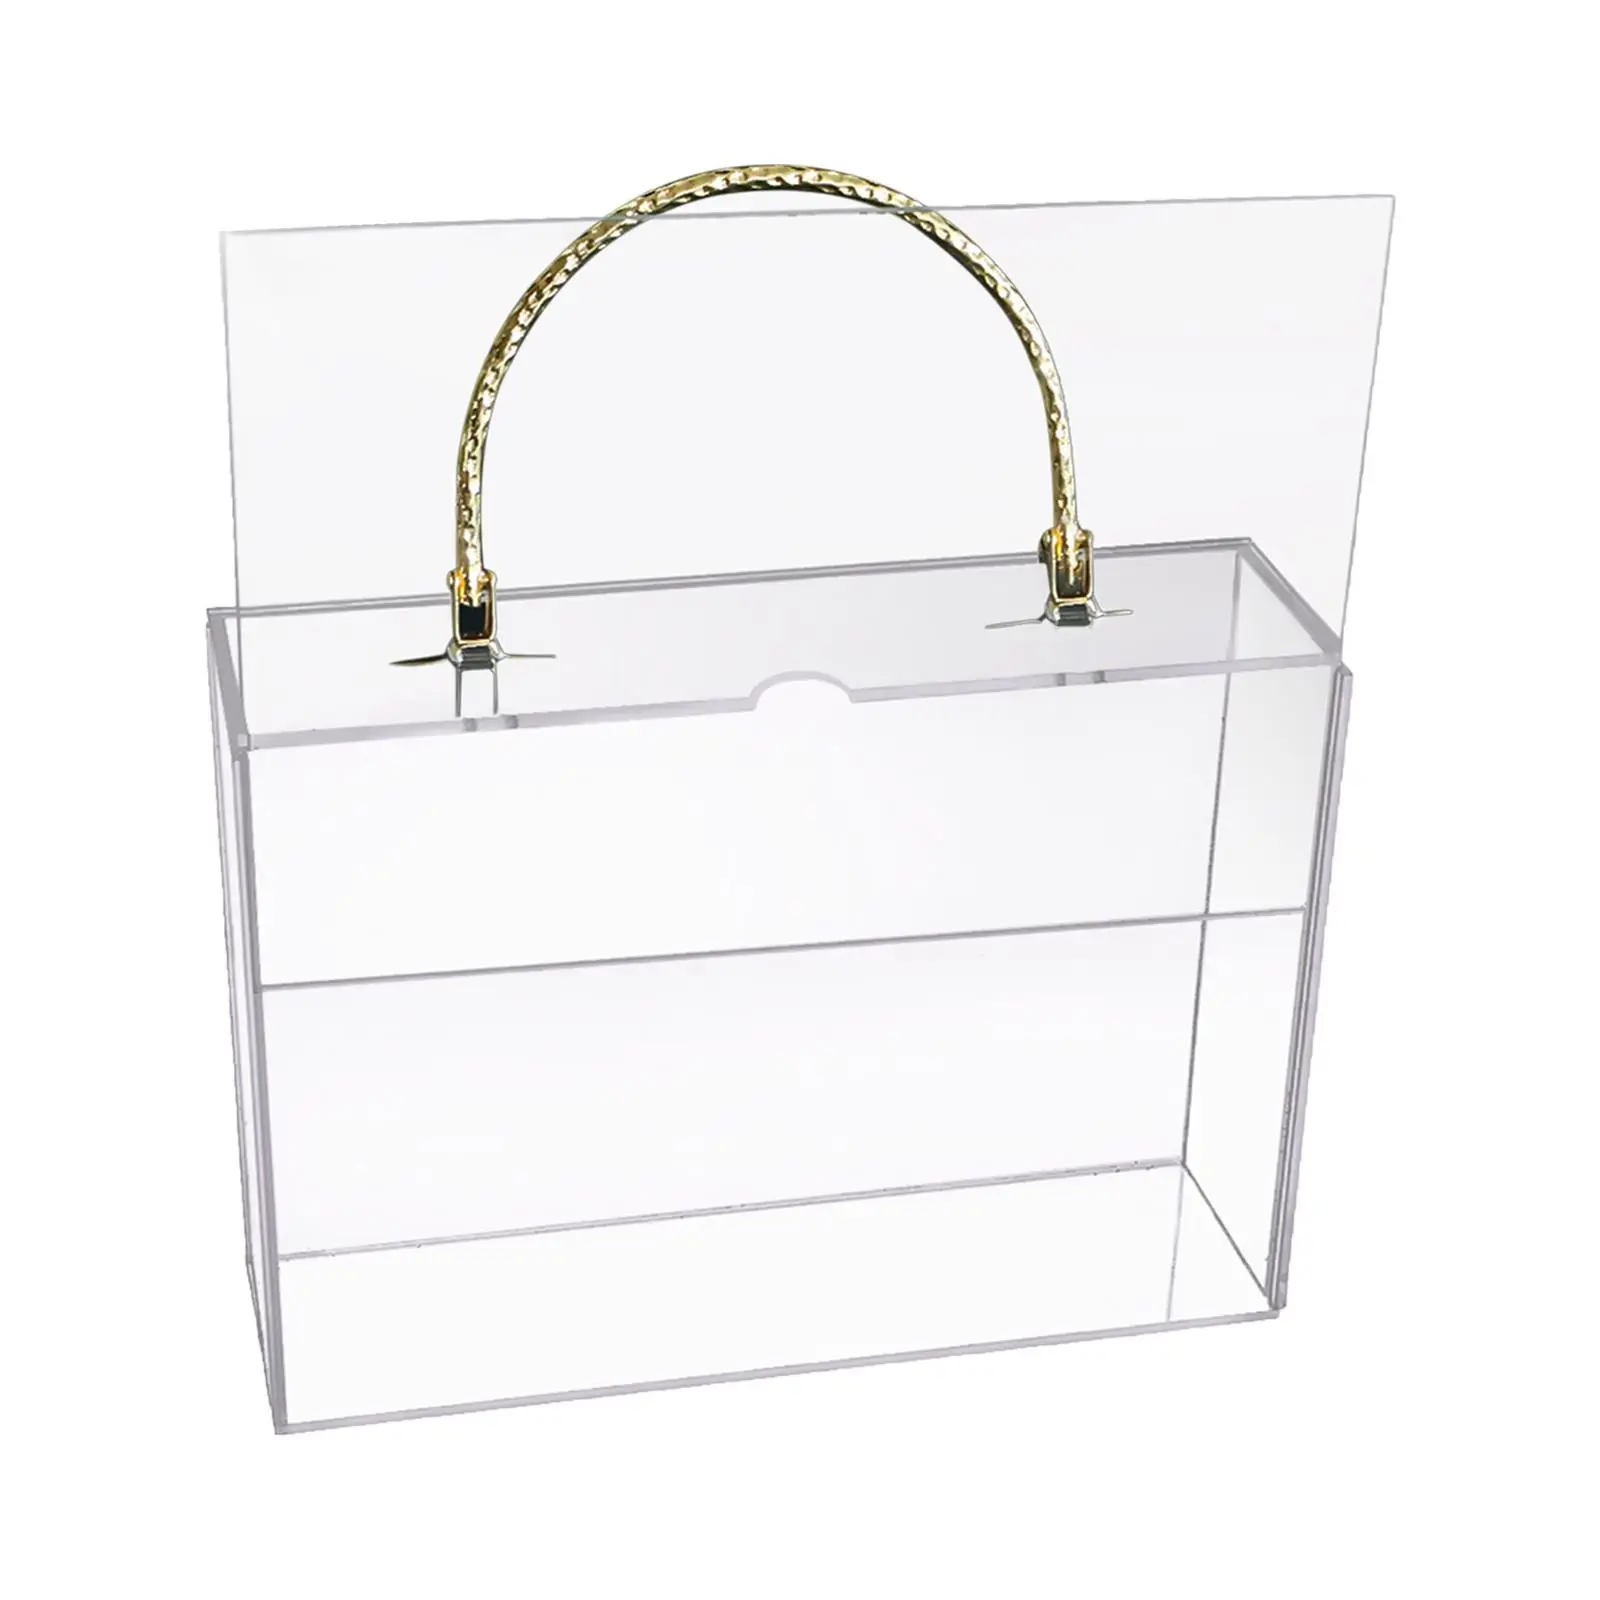 Clear Acrylic Flower Box Reusable Rectangle with Handles Portable Gift Box Empty Present Boxes Large for Party Favor Shadow Box